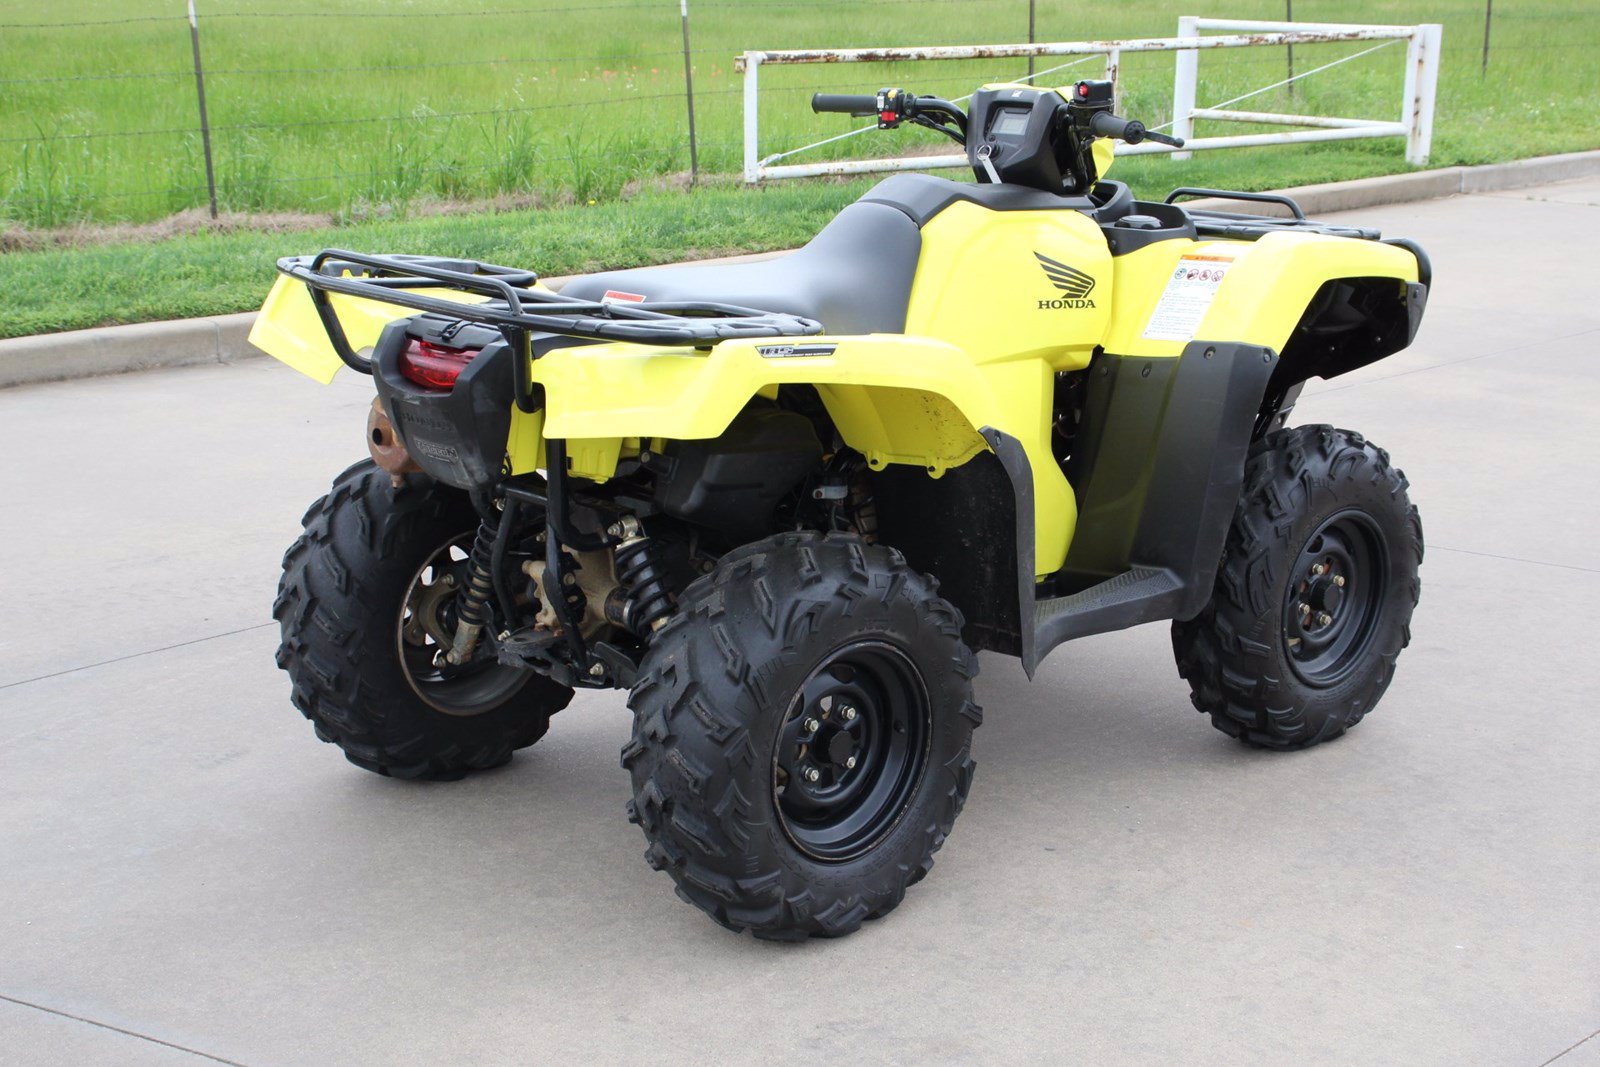 PreOwned 2017 Honda TRX 500 FOURTRAX FOREMAN in Tyler